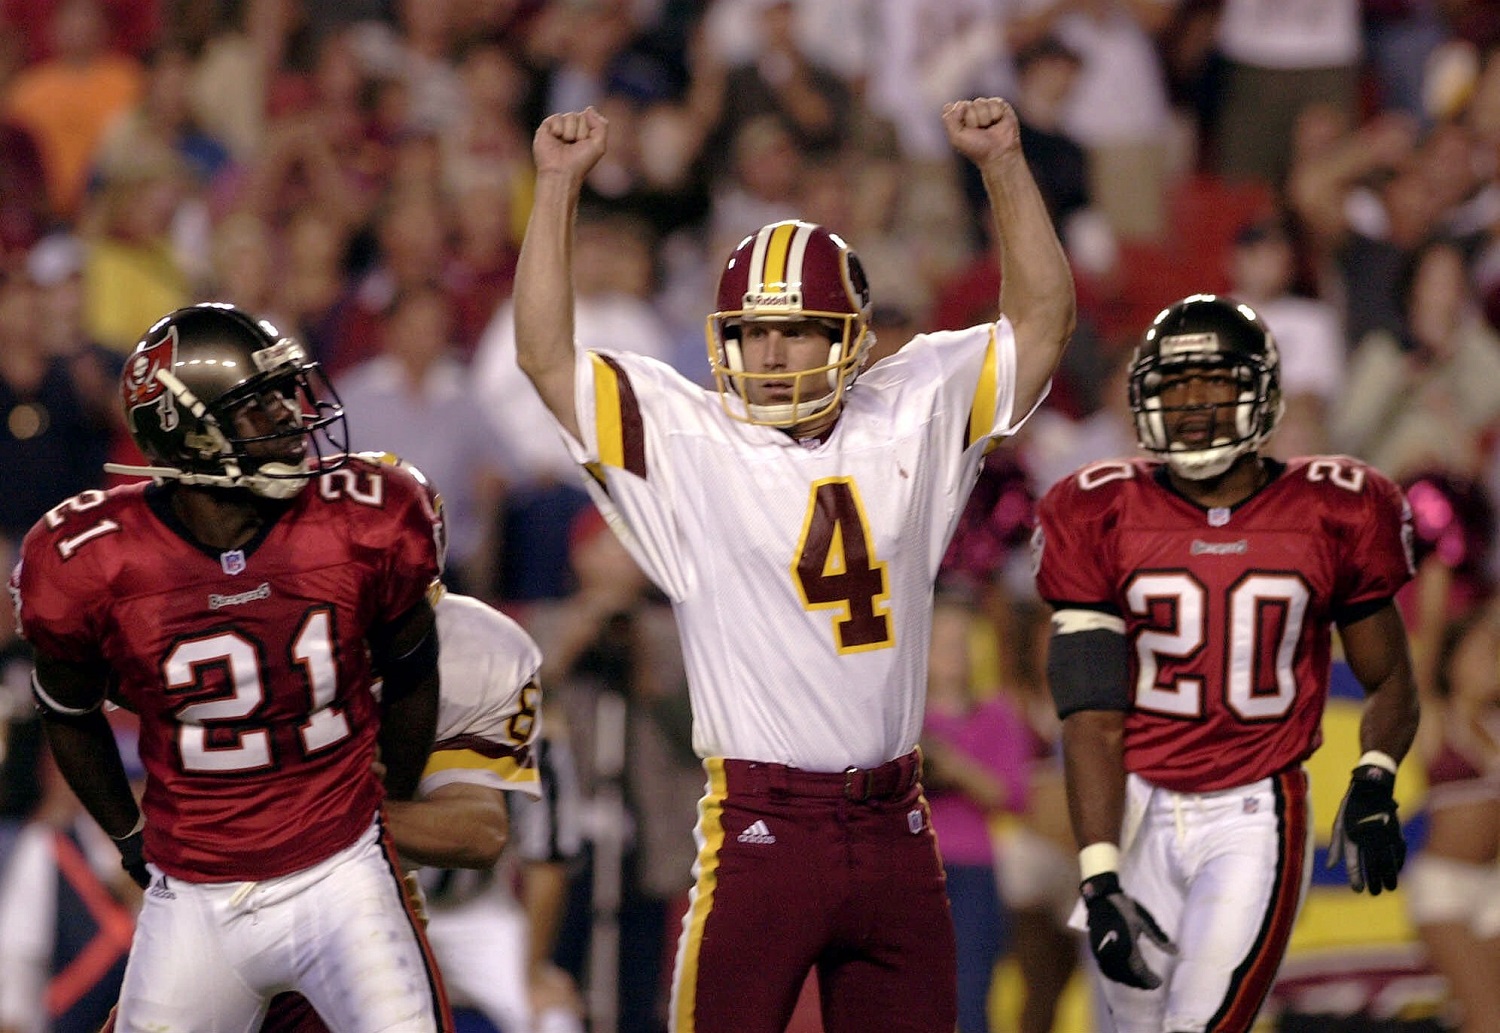 Washington Redskins kicker Michael Husted (4) celebrates after his winning field goal in overtime to beat the Tampa Bay Buccaneers 20-17, Sunday, Oct. 1, 2000, at FedEx Field in Landover, Md. Tampa Bay's Donnie Abraham (21) and Ronde Barber (20) look on.  (AP Photo/Nick Wass)